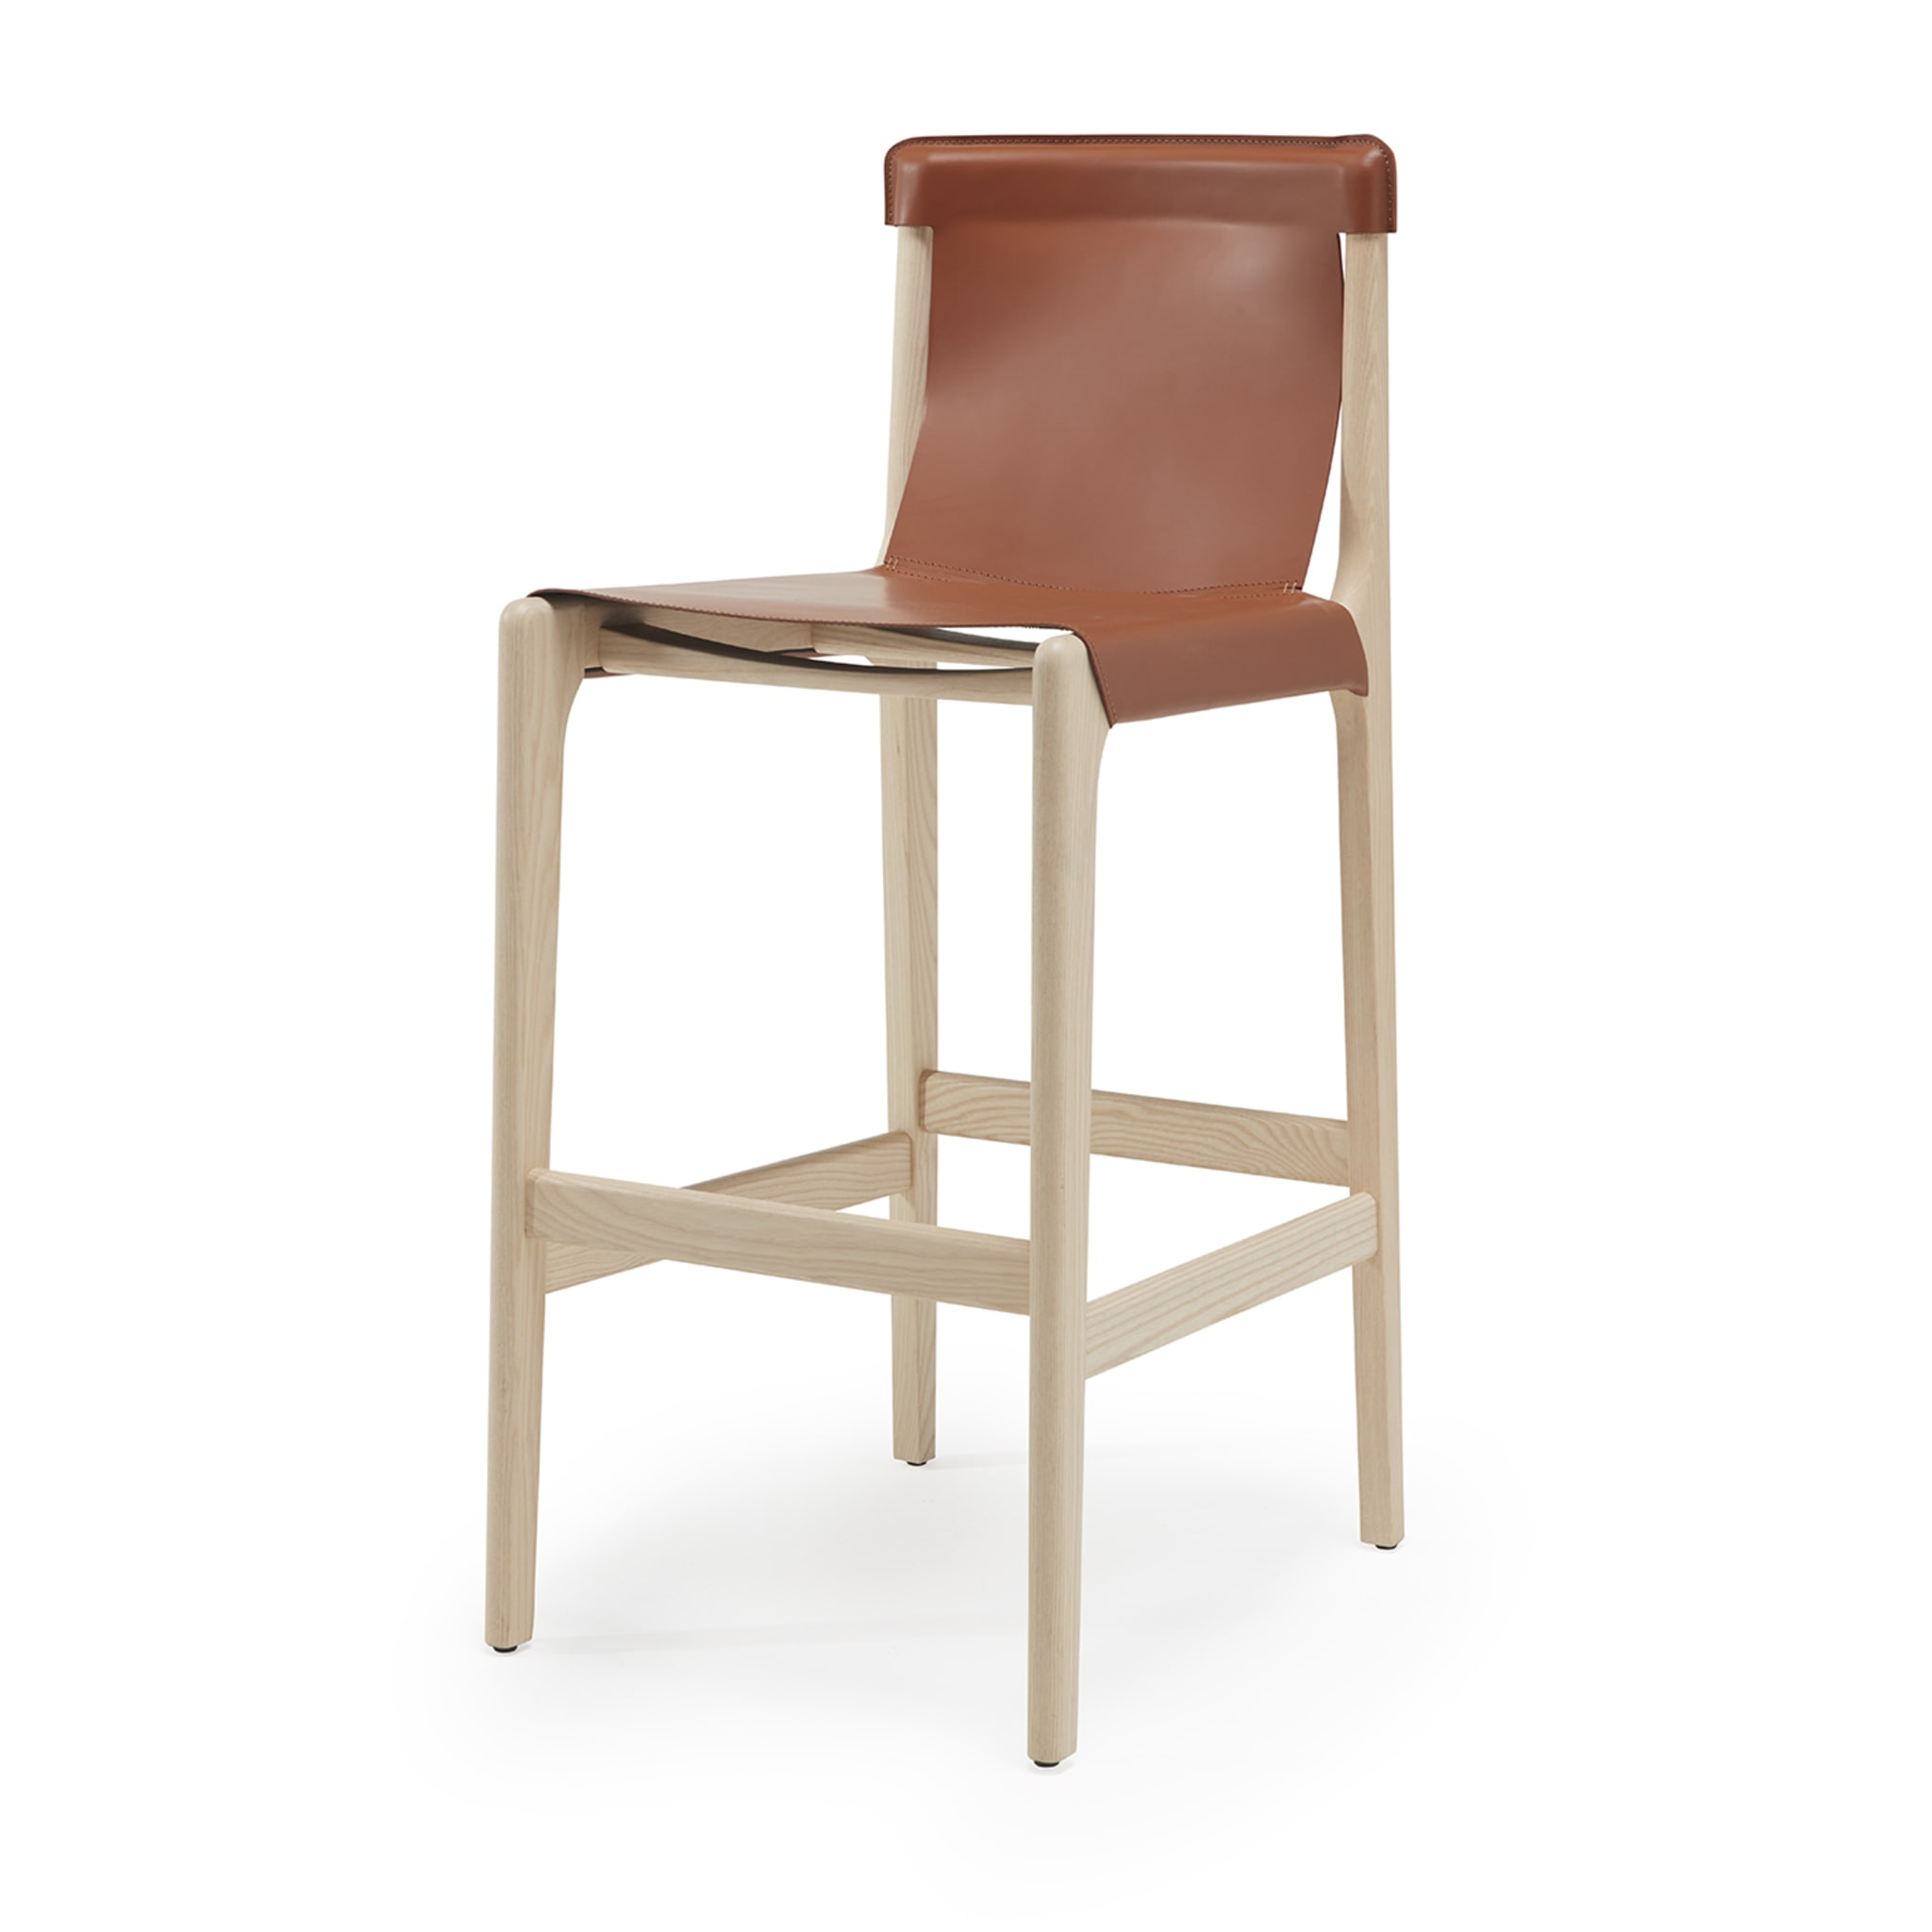 Burano/sg 30 Brown Leather Counter Stool by Balutto Associati - Alternative view 3